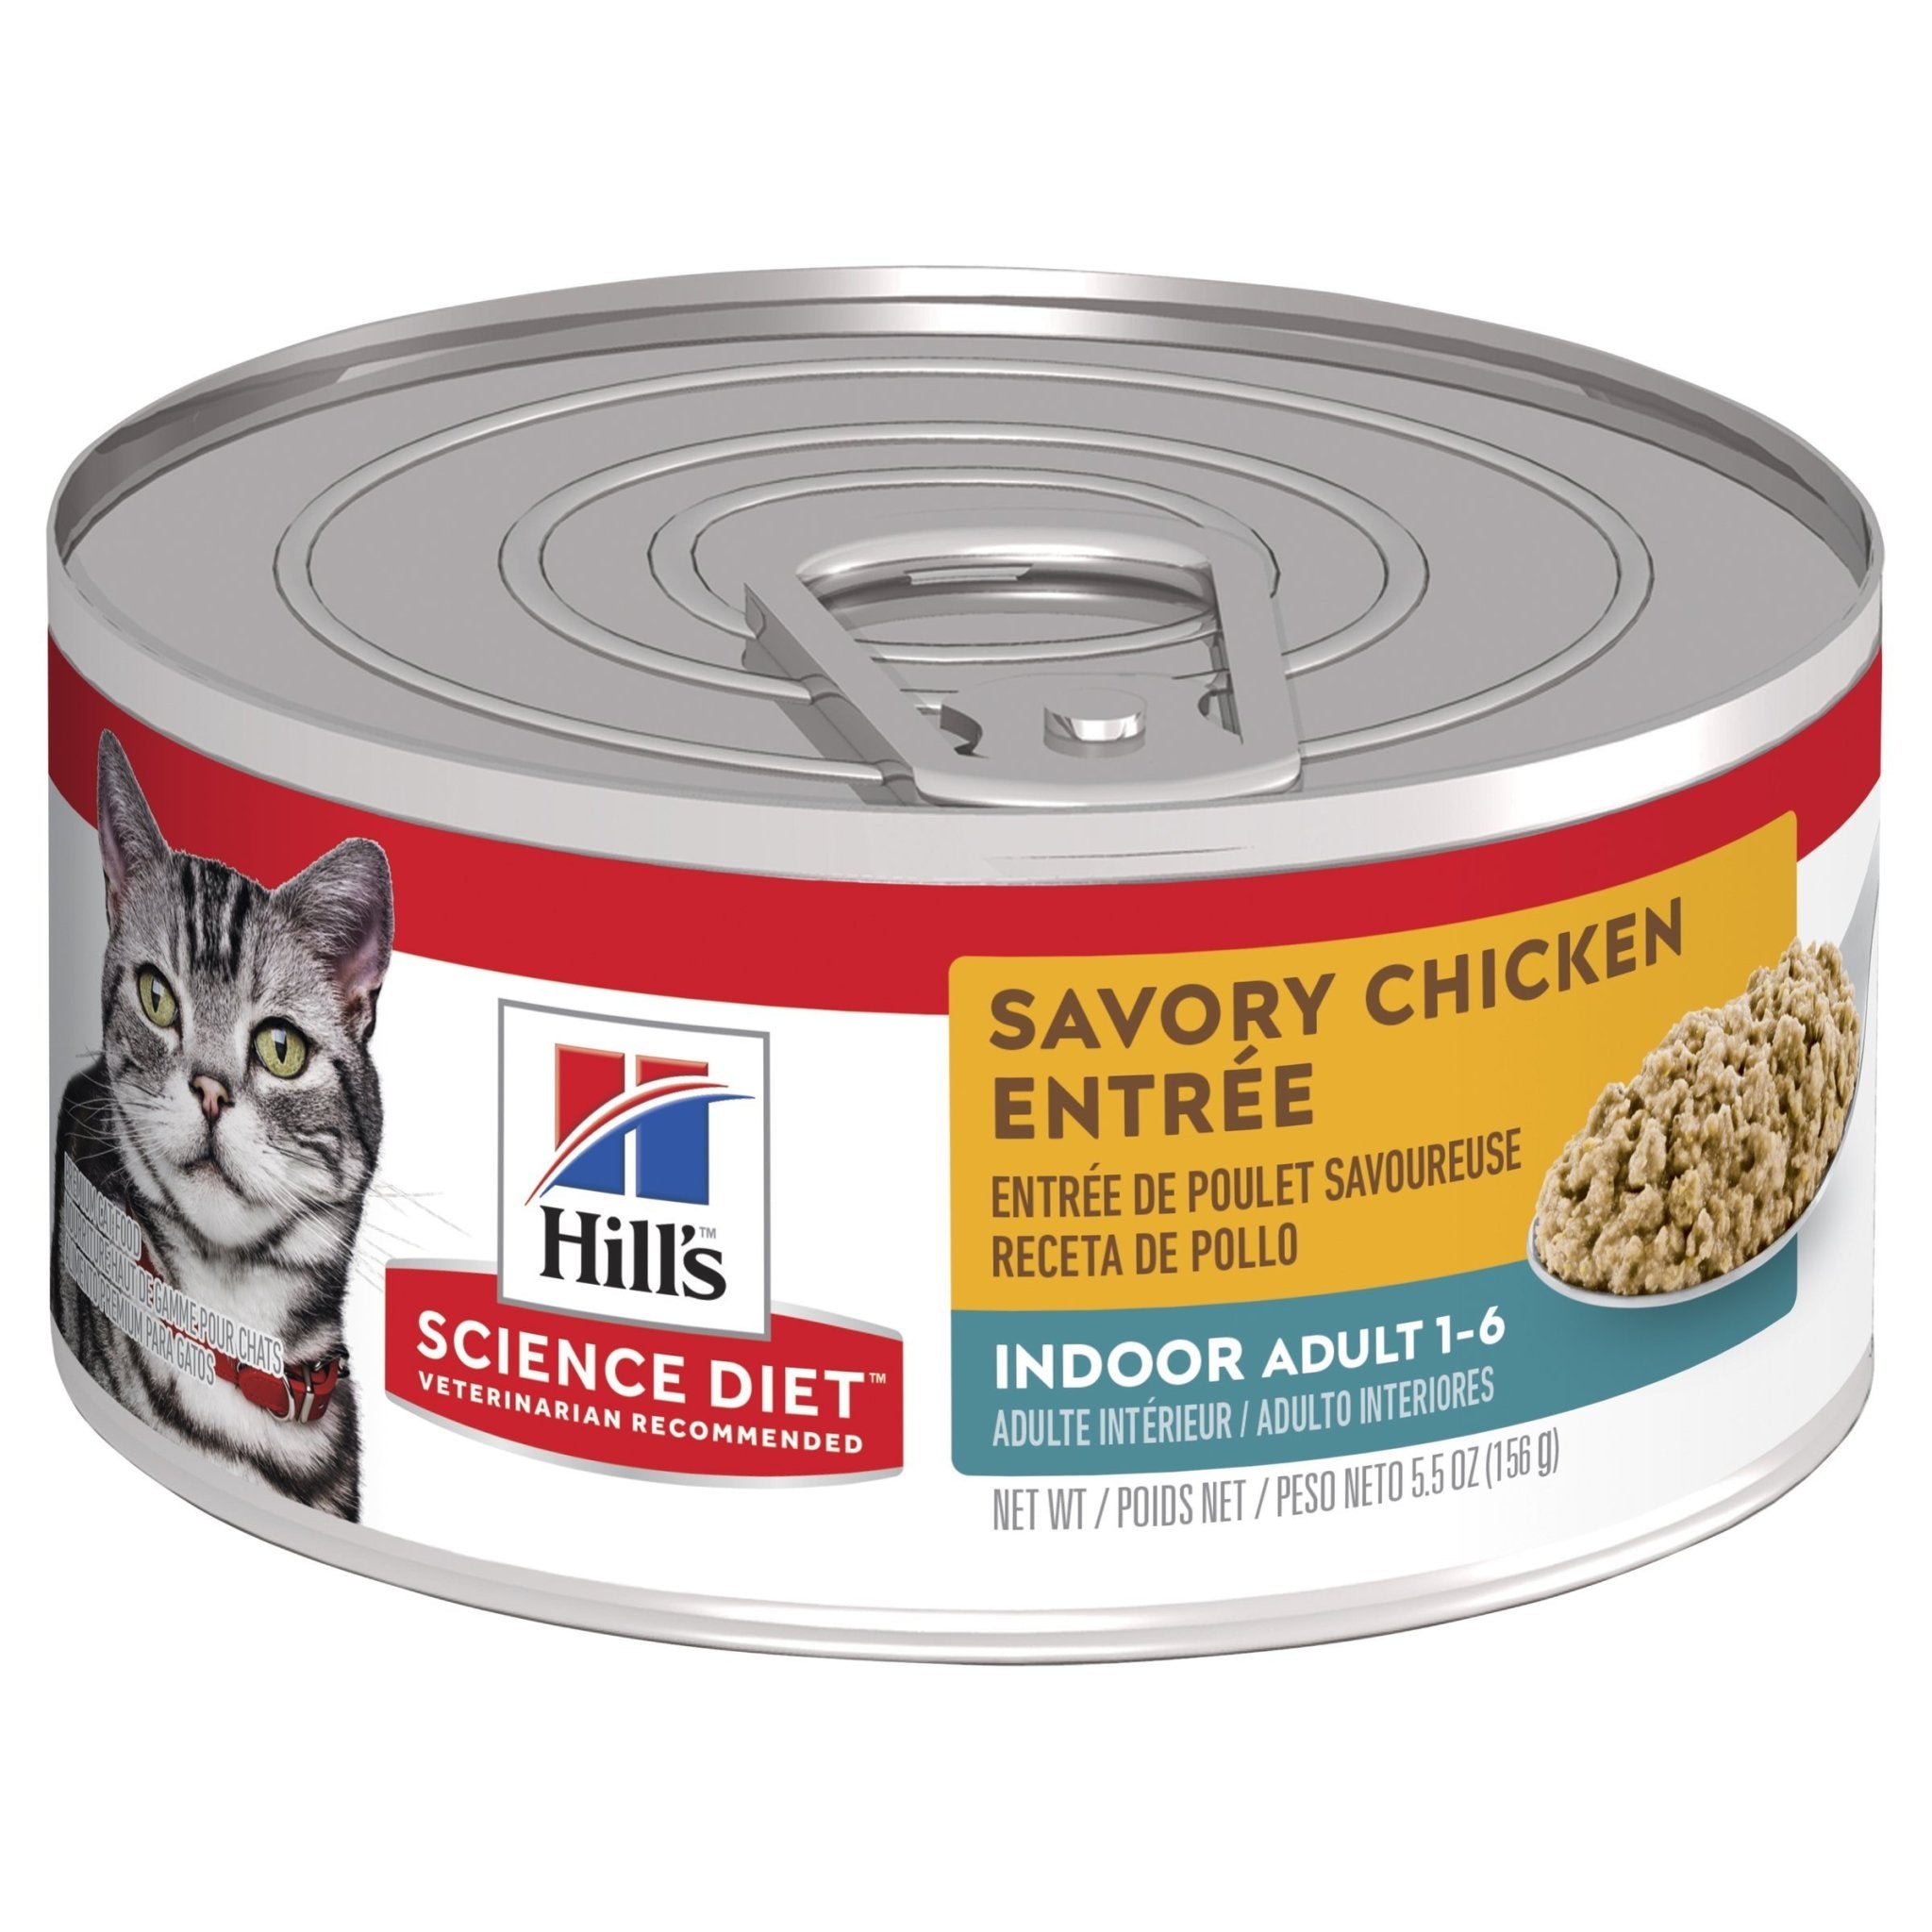 Hill's Science Diet Adult Indoor Savory Chicken Entrée Canned Cat Food, 156g, 24 Pack